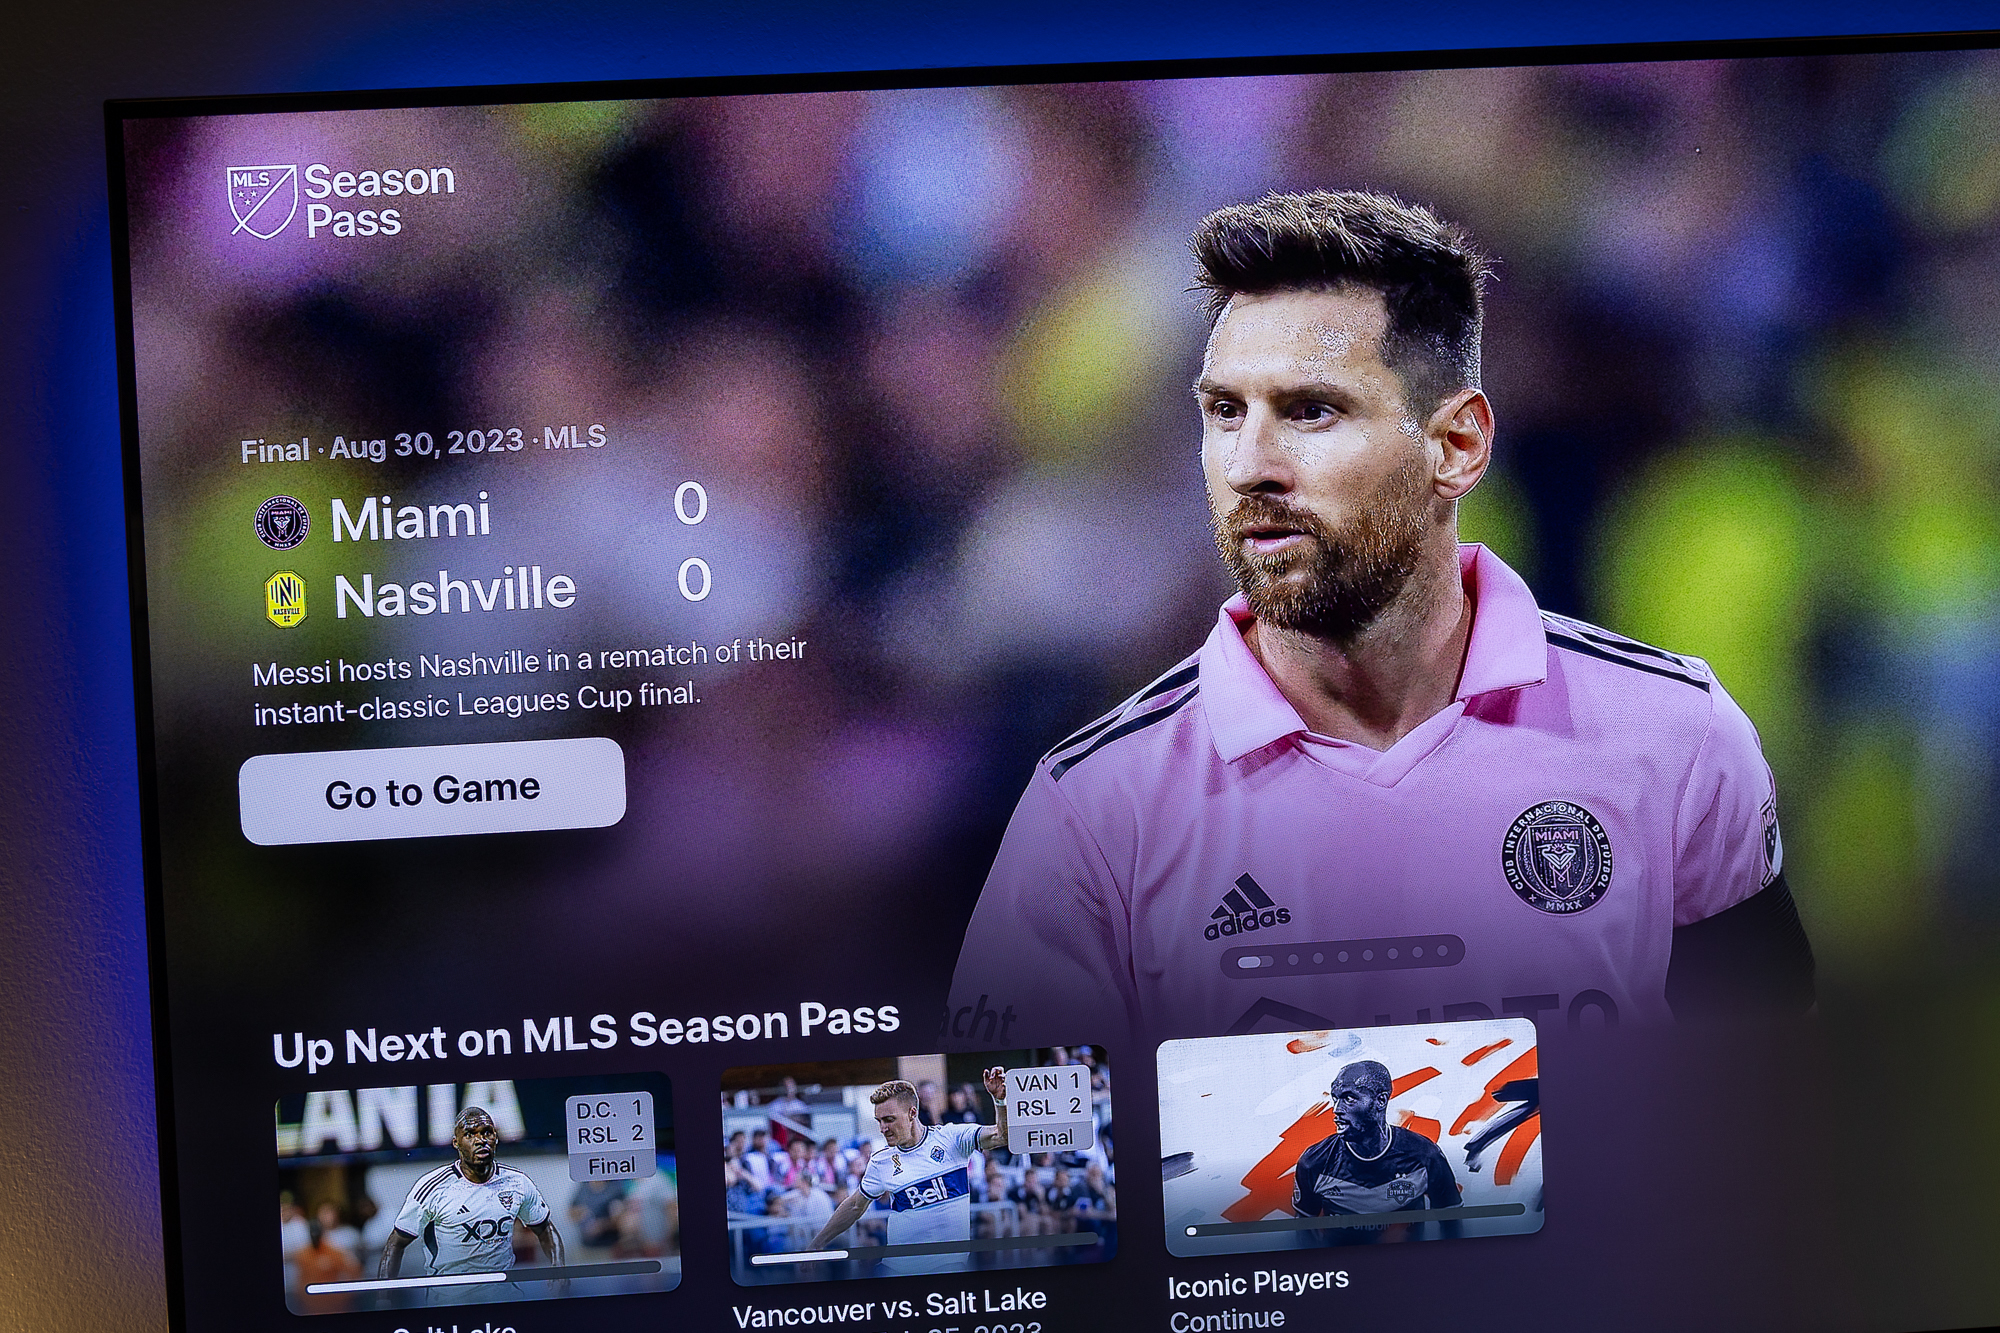 Apple and MLS to present all MLS matches for 10 years, beginning in 2023 -  Apple